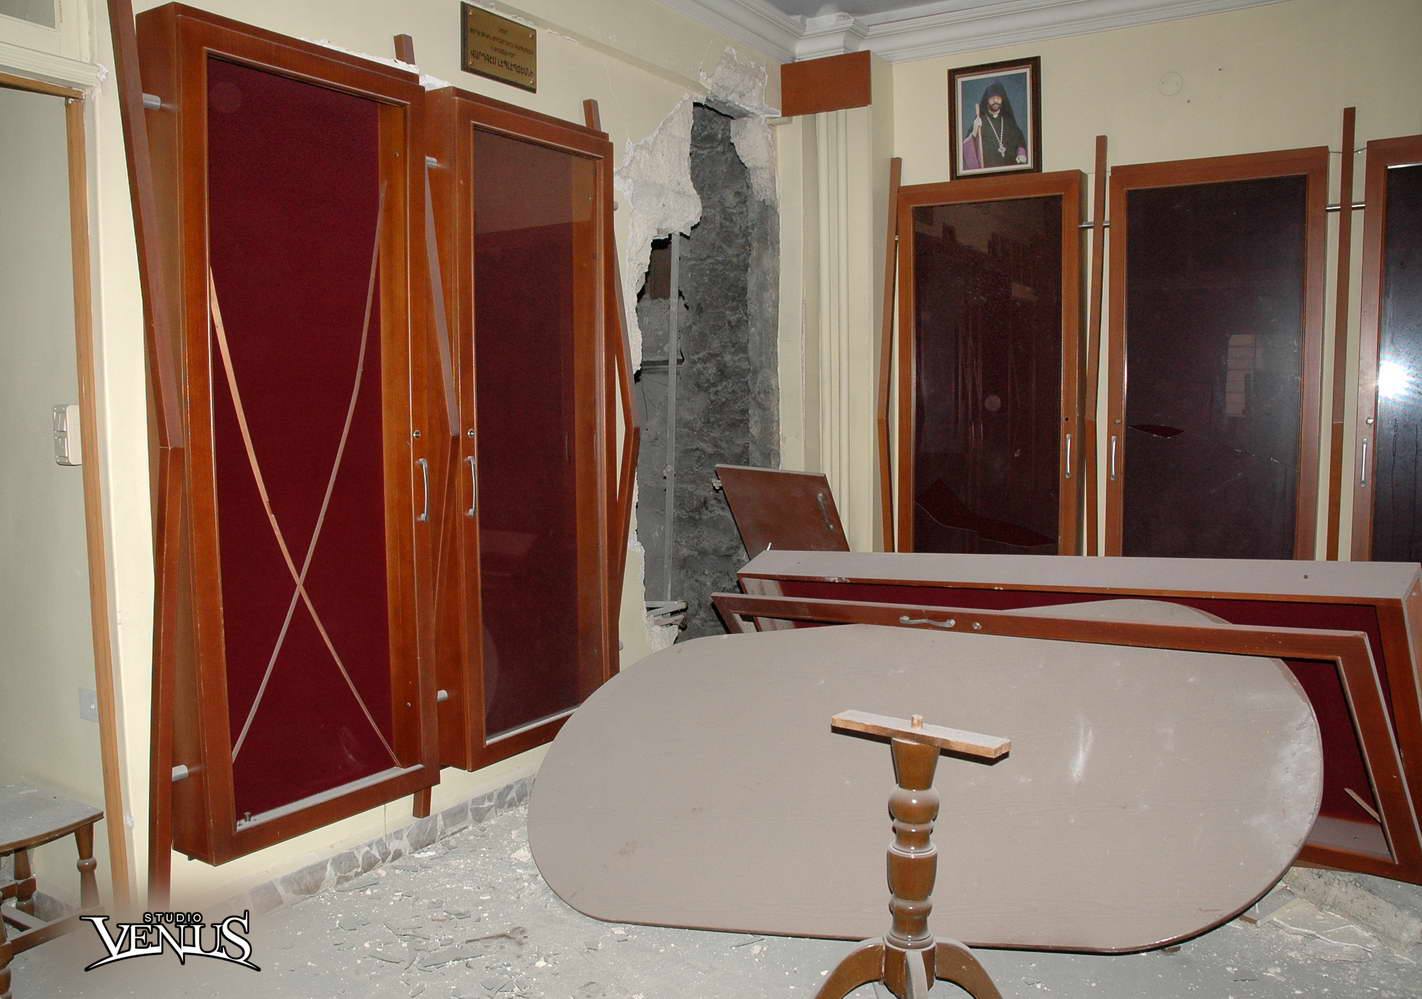 The ARS Central office confirmed the damages to the clinic to the Armenian Weekly. (Photo: Studio Venus/Kantsasar)